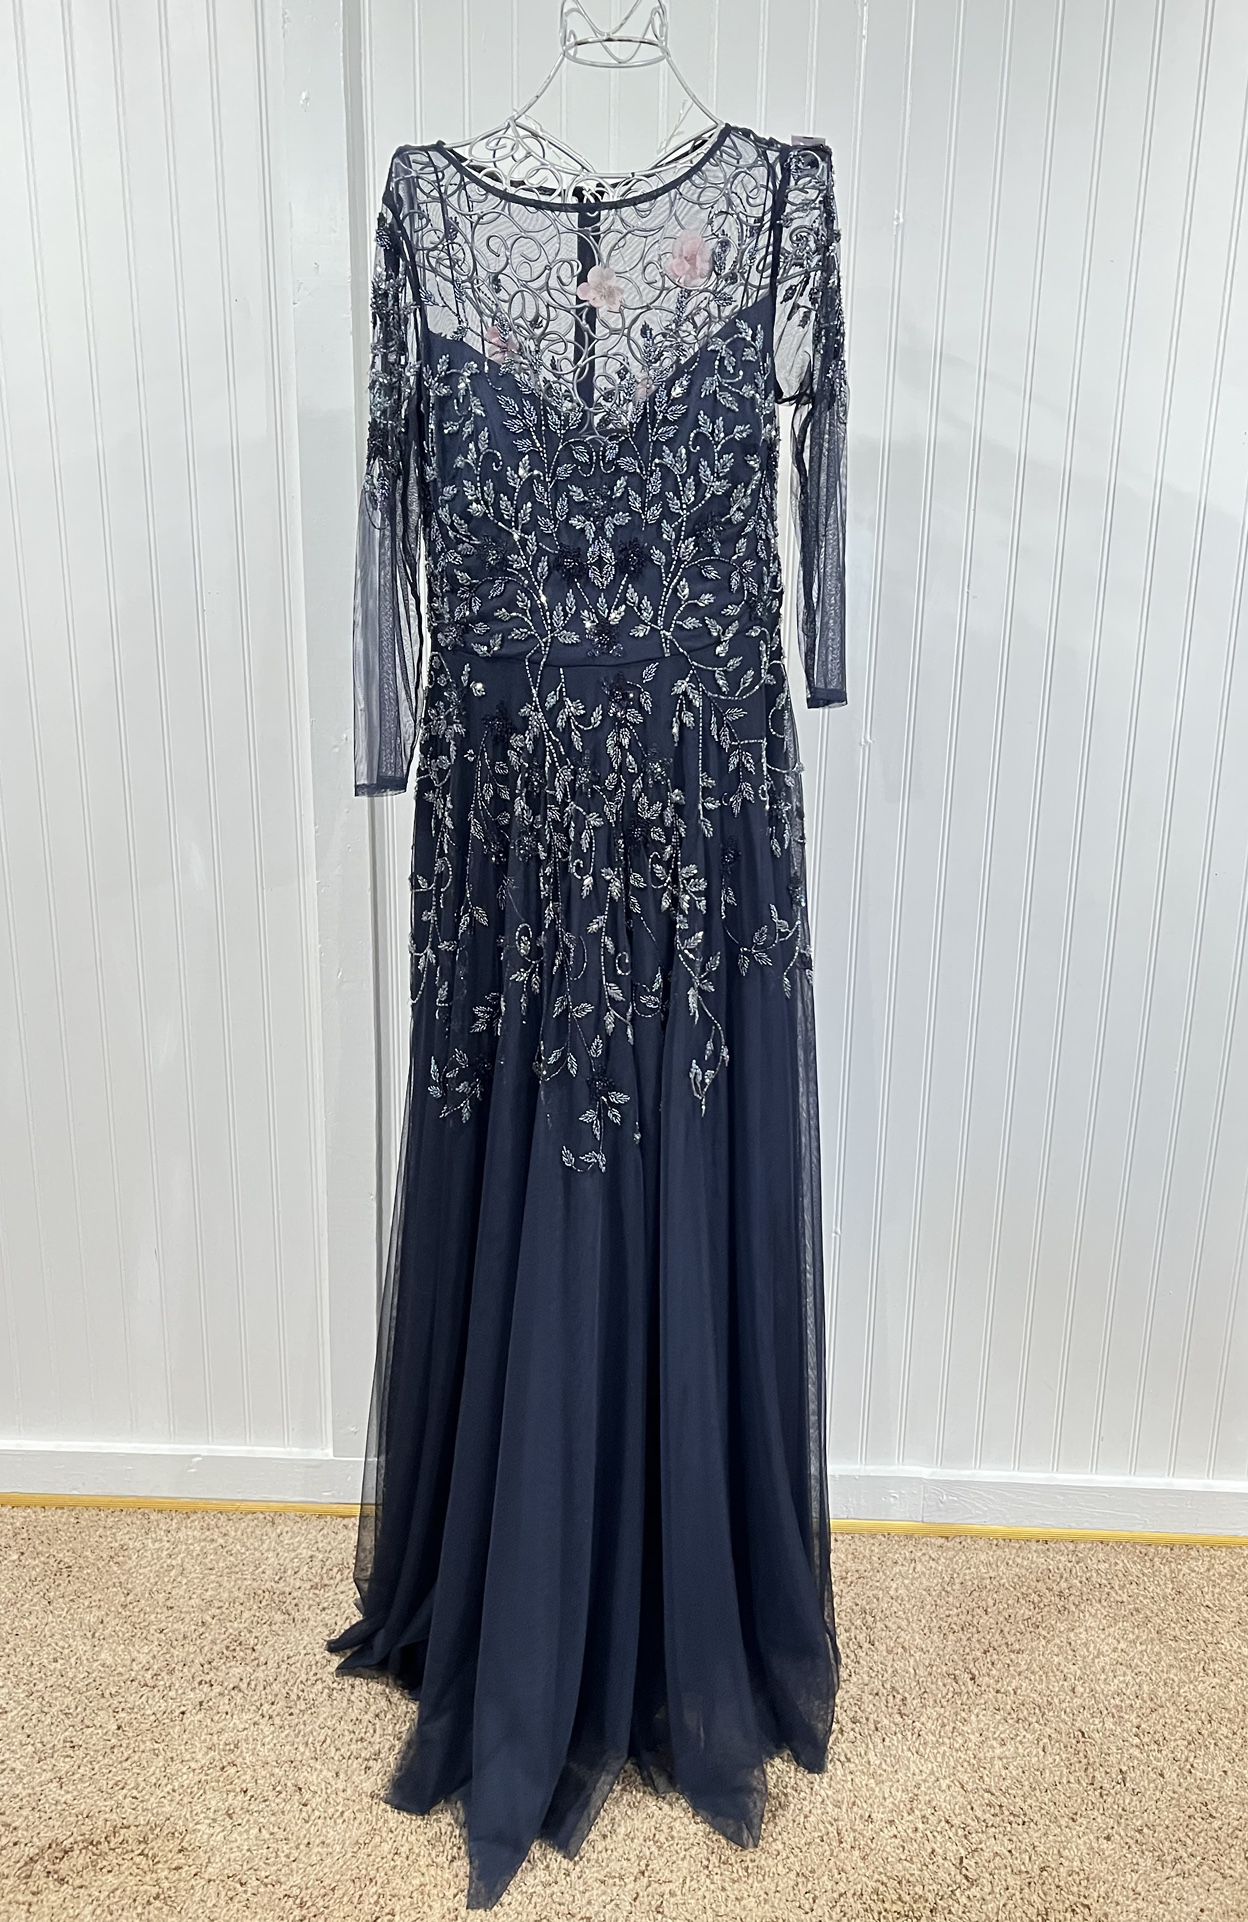 THEIA formal evening dress Size 14  Small detail in the front  Details in the photo